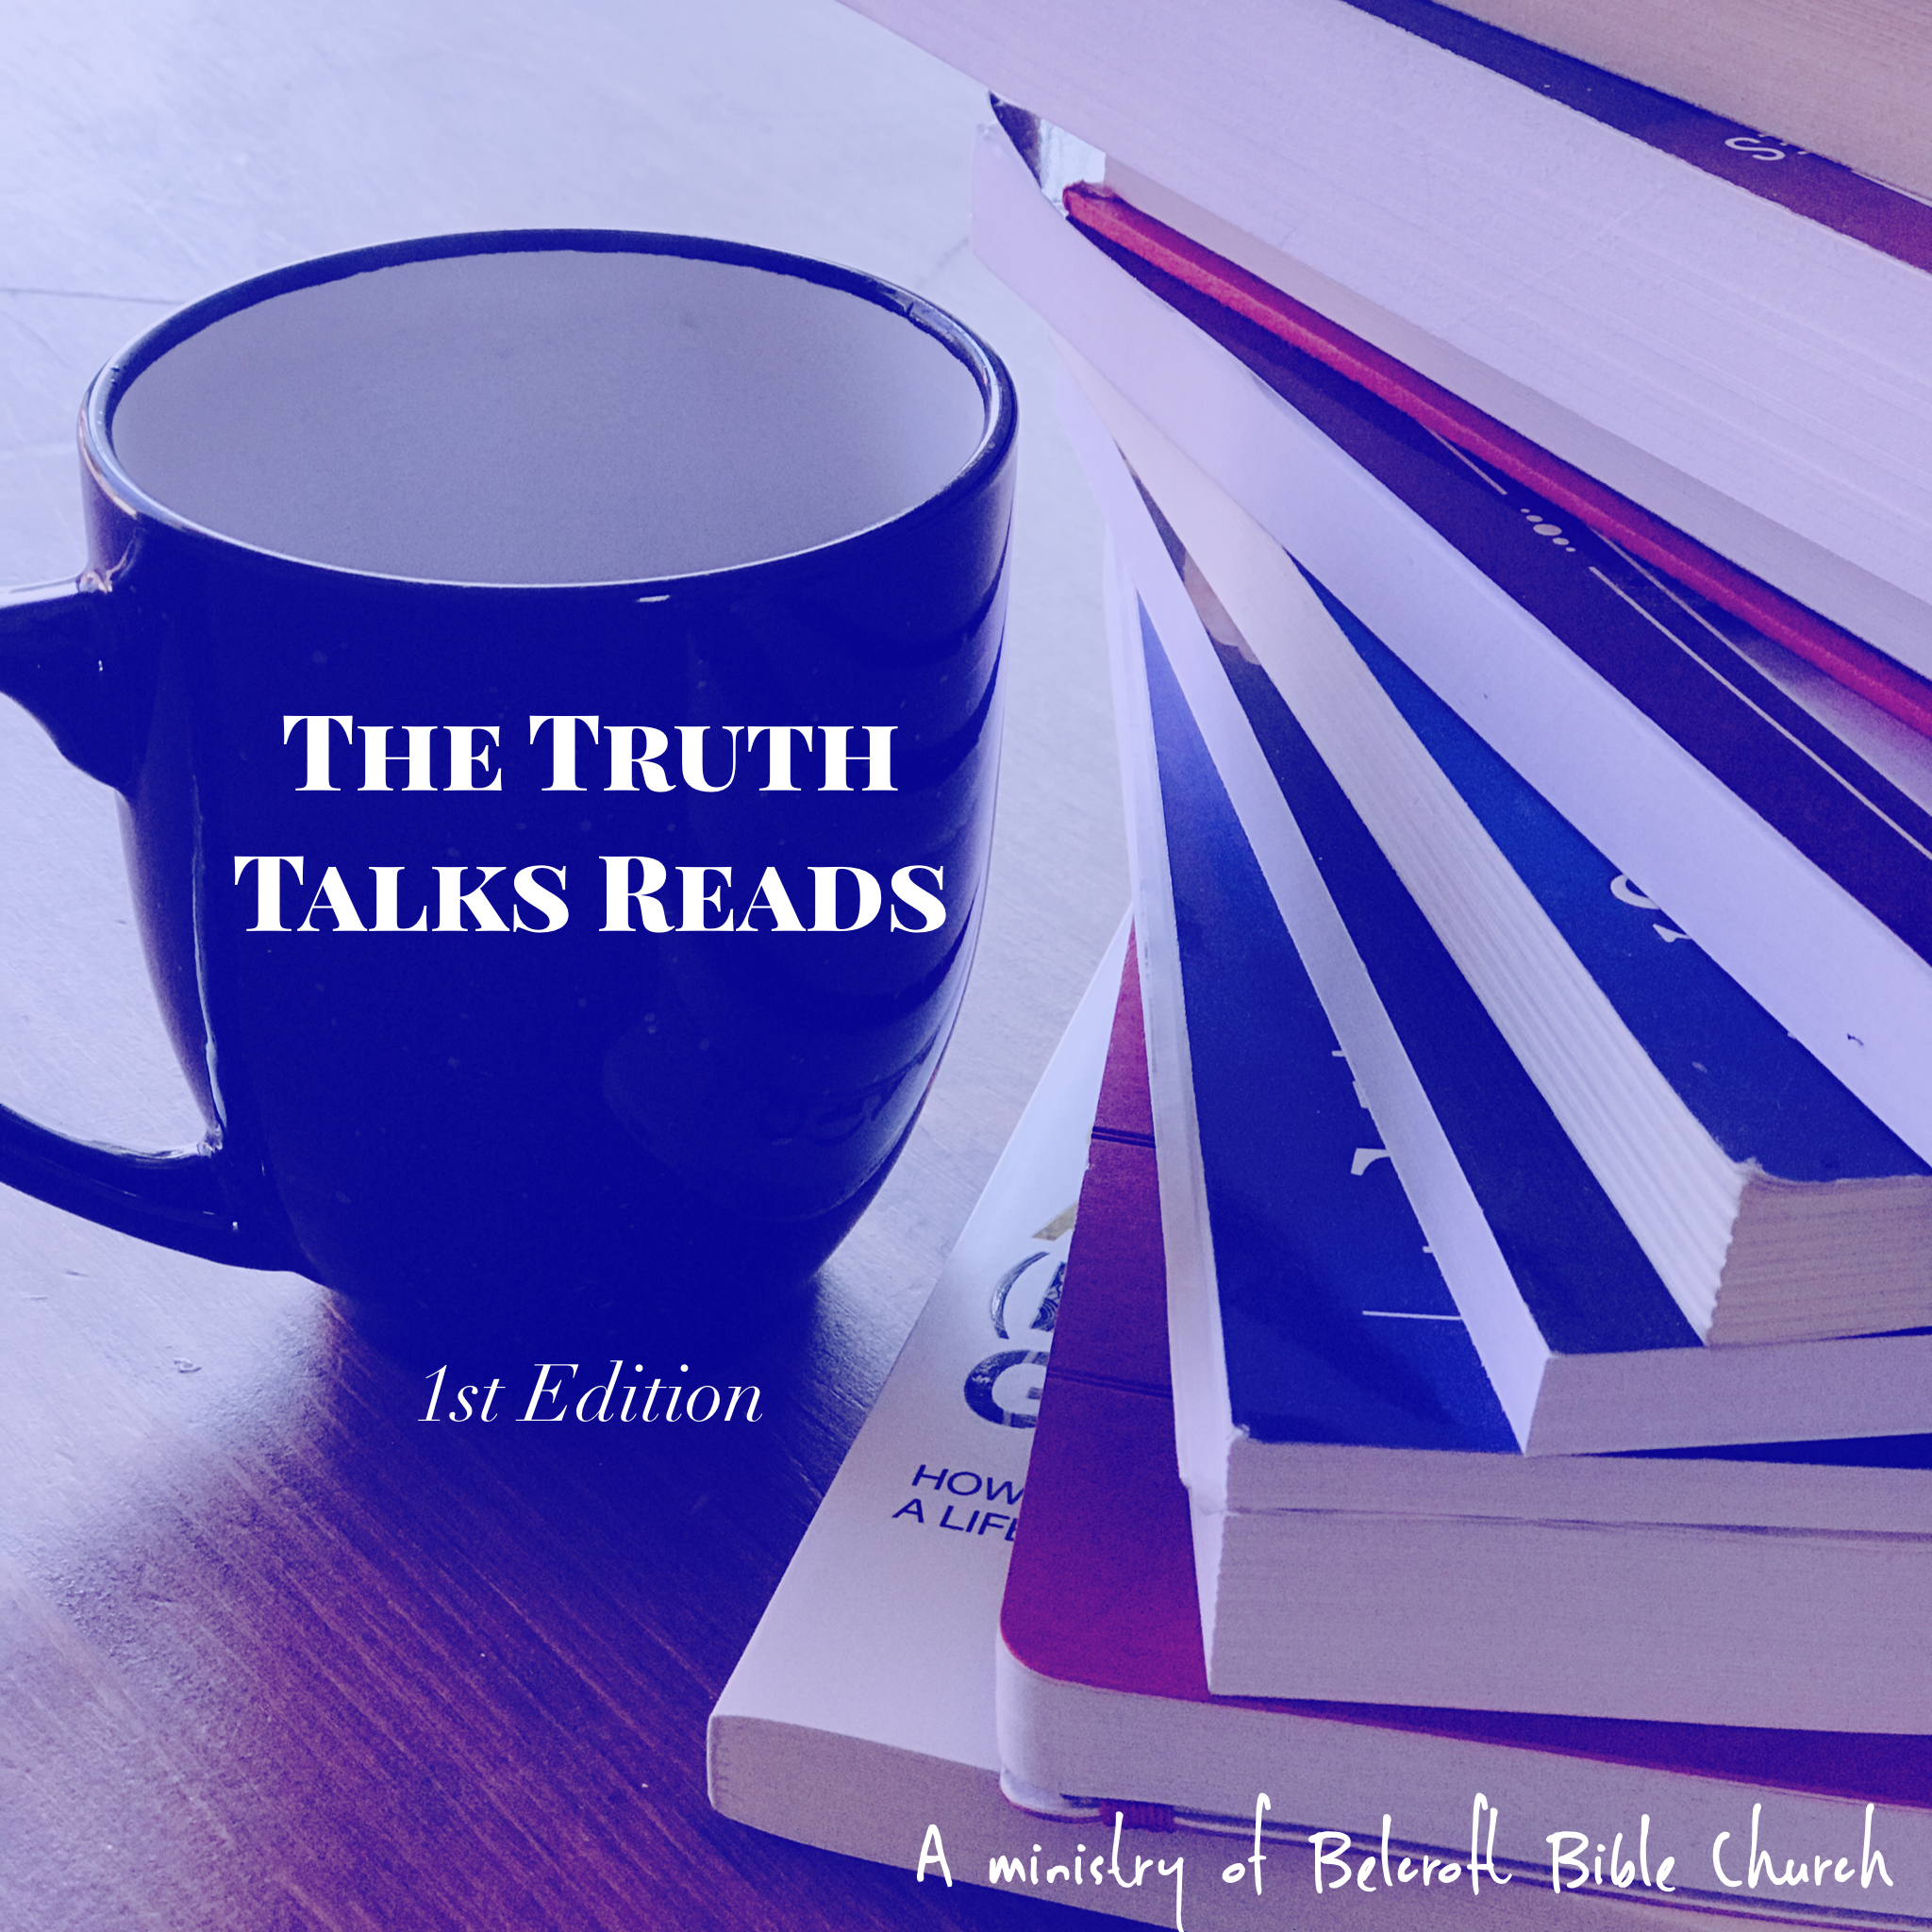 **SES (Special Edition Saturday)** The Truth Talks Podcast Episode 040 - The Truth Talks Reads 1st Edition